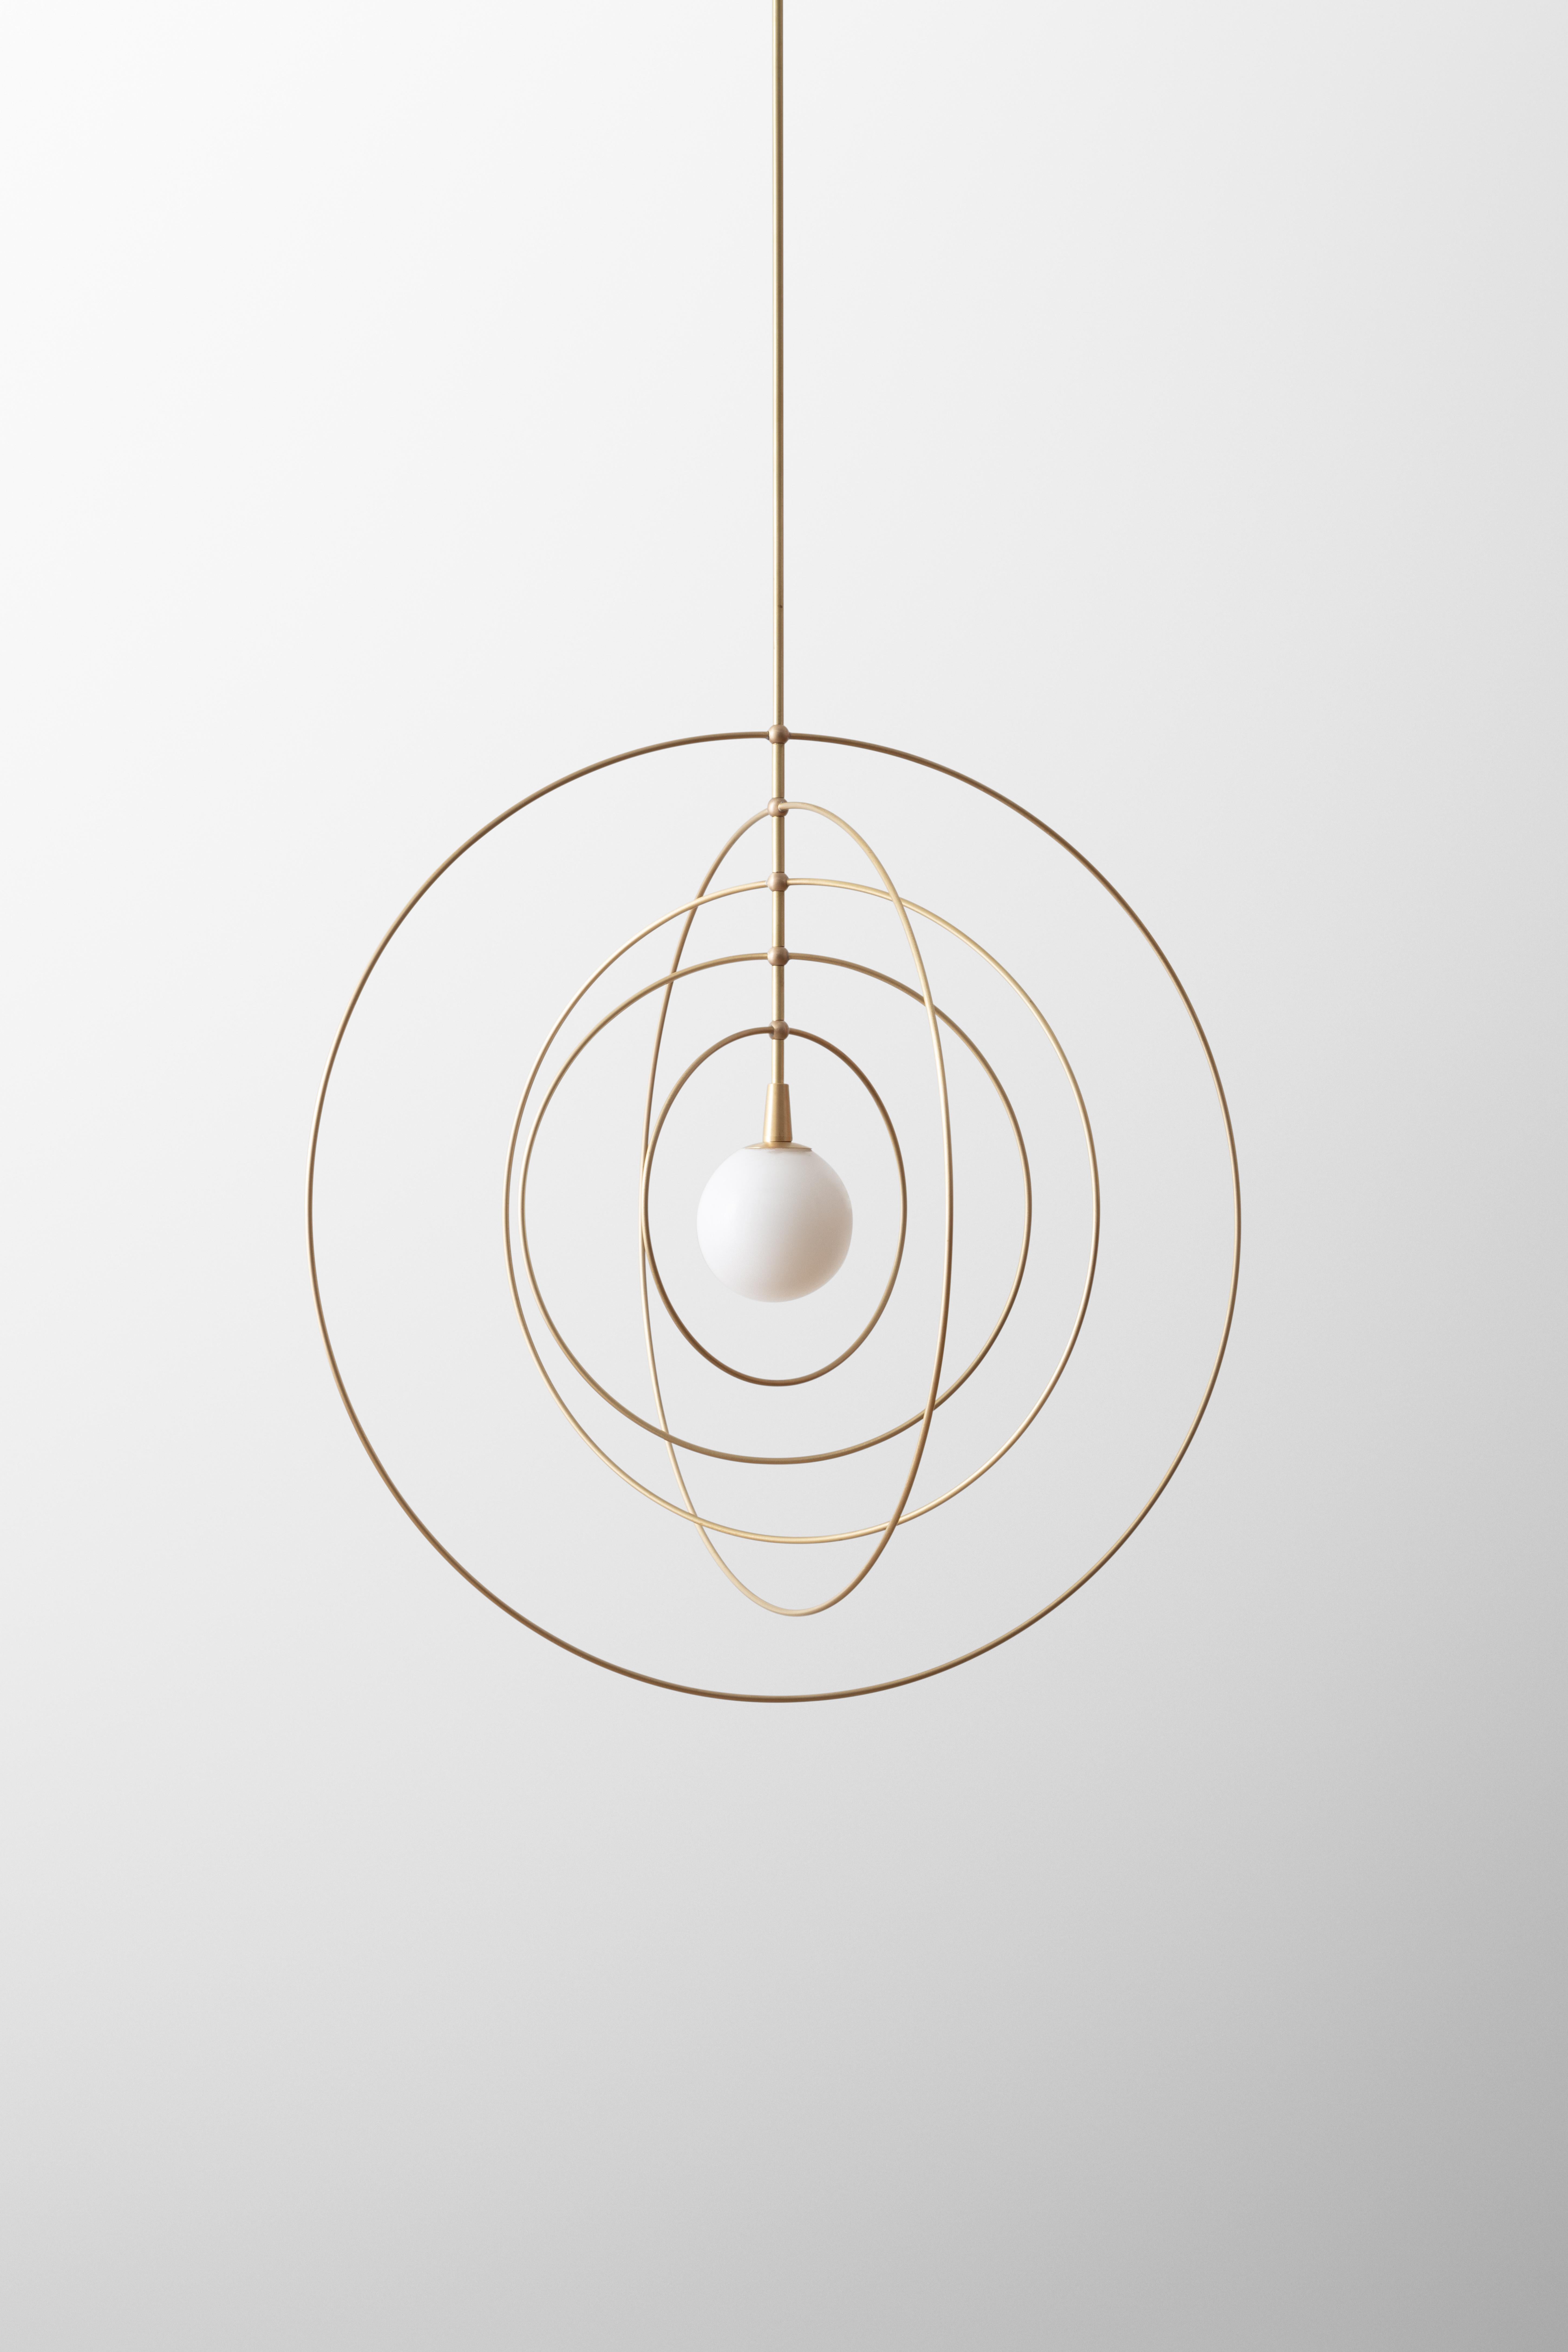 The Mobile series combine sculpture with lighting, invoking motifs from atomic models and the space age. The concentric rings can be spun and reconfigured, inviting play and whimsy. A central orb illuminates the brass rings, which are hand-finished